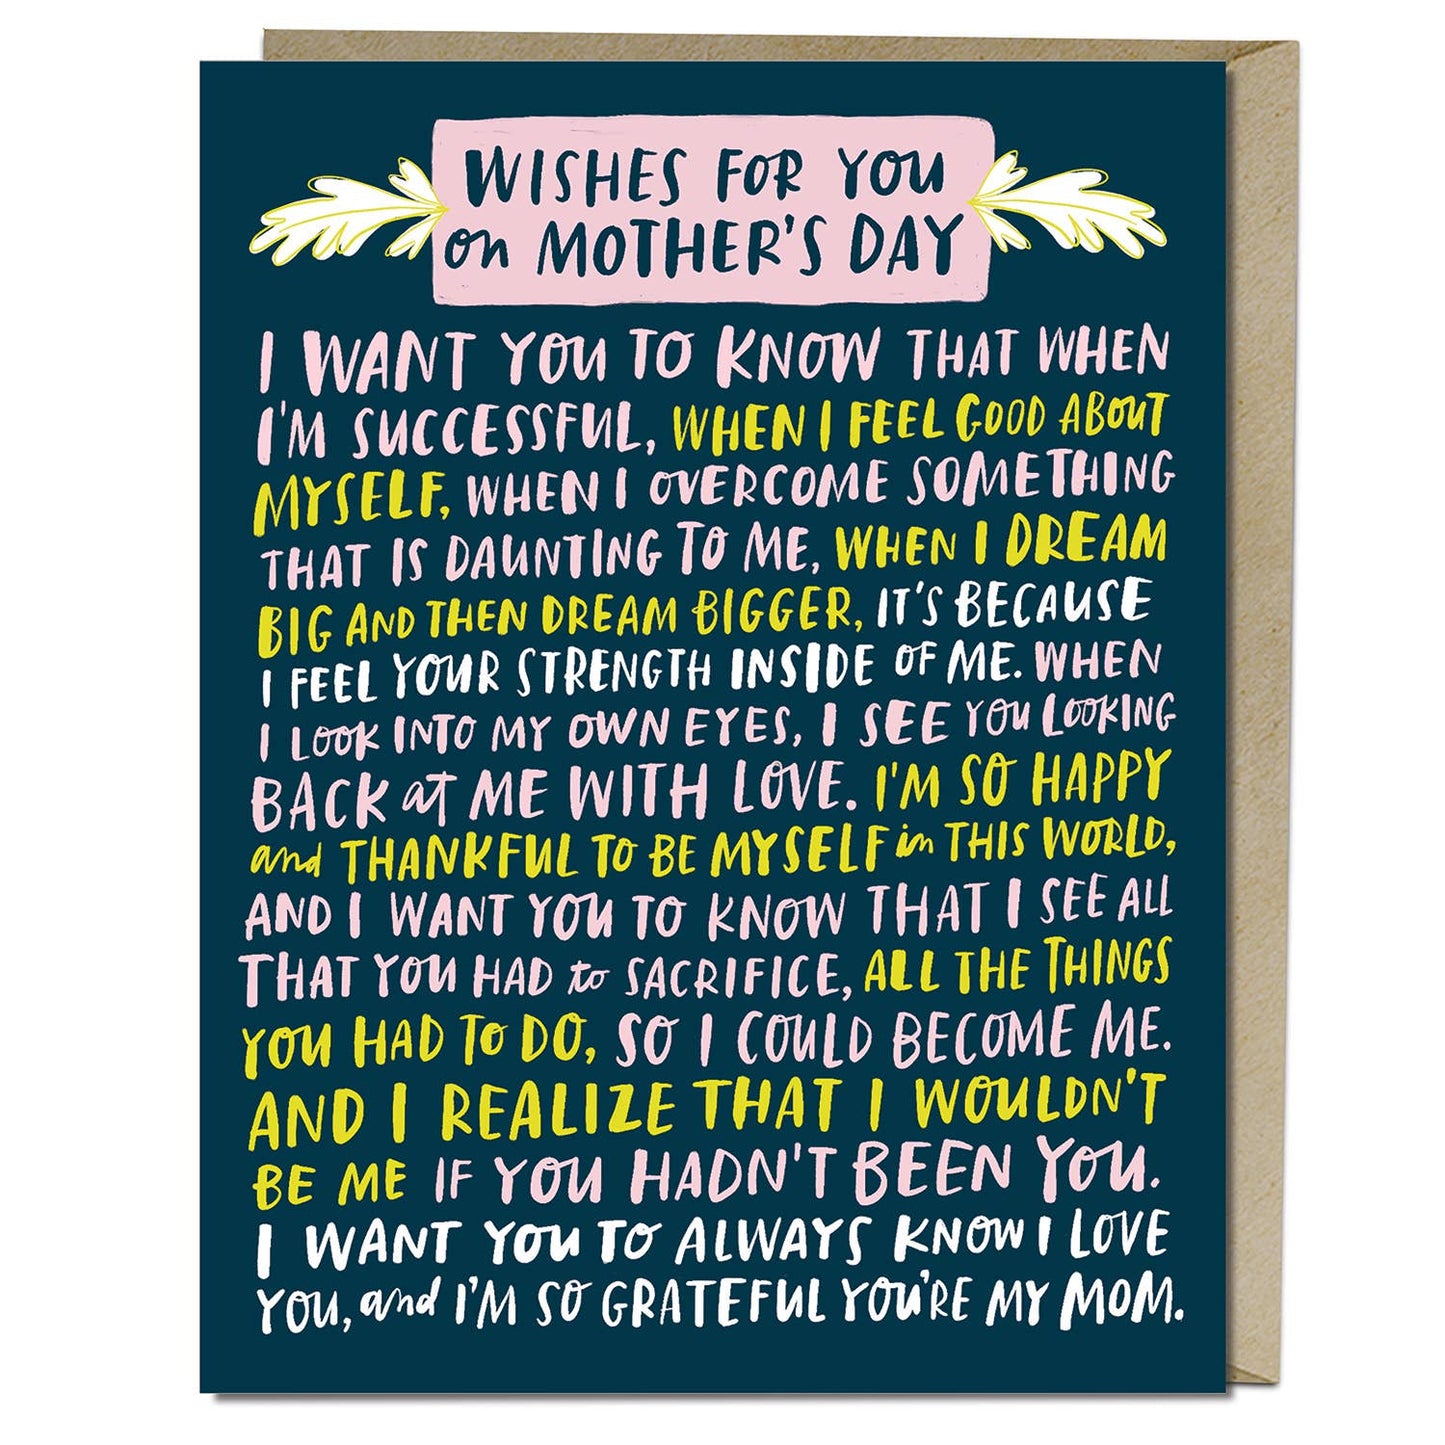 Wishes For You Mother's Day Card - Origin Maternity 